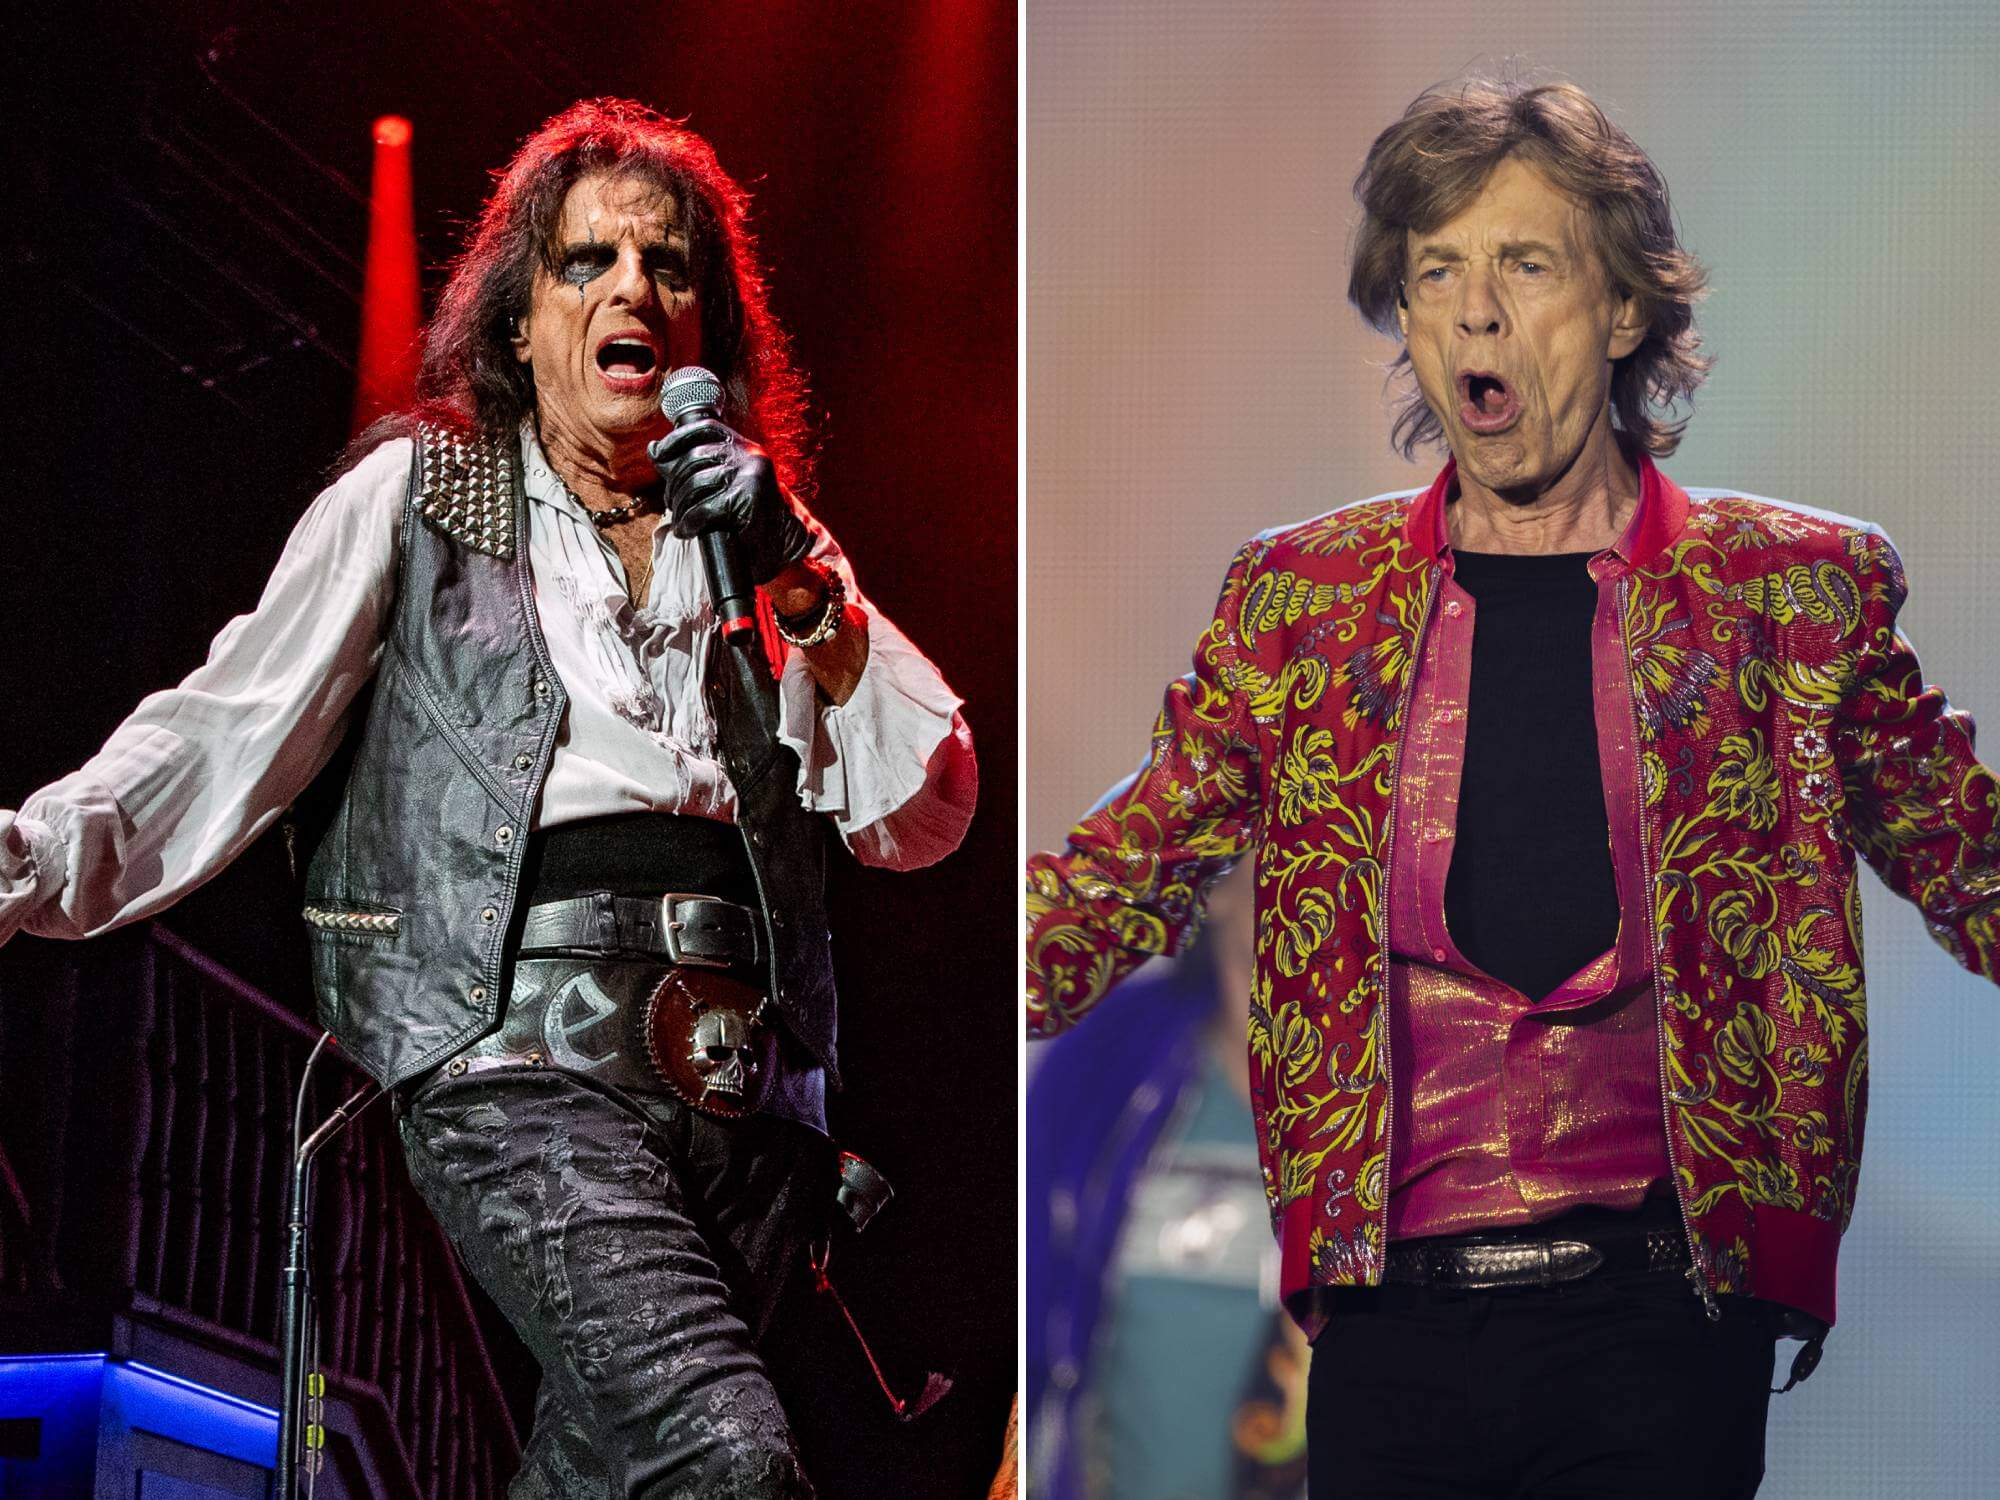 Alice Cooper and Mick Jagger of The Rolling Stones